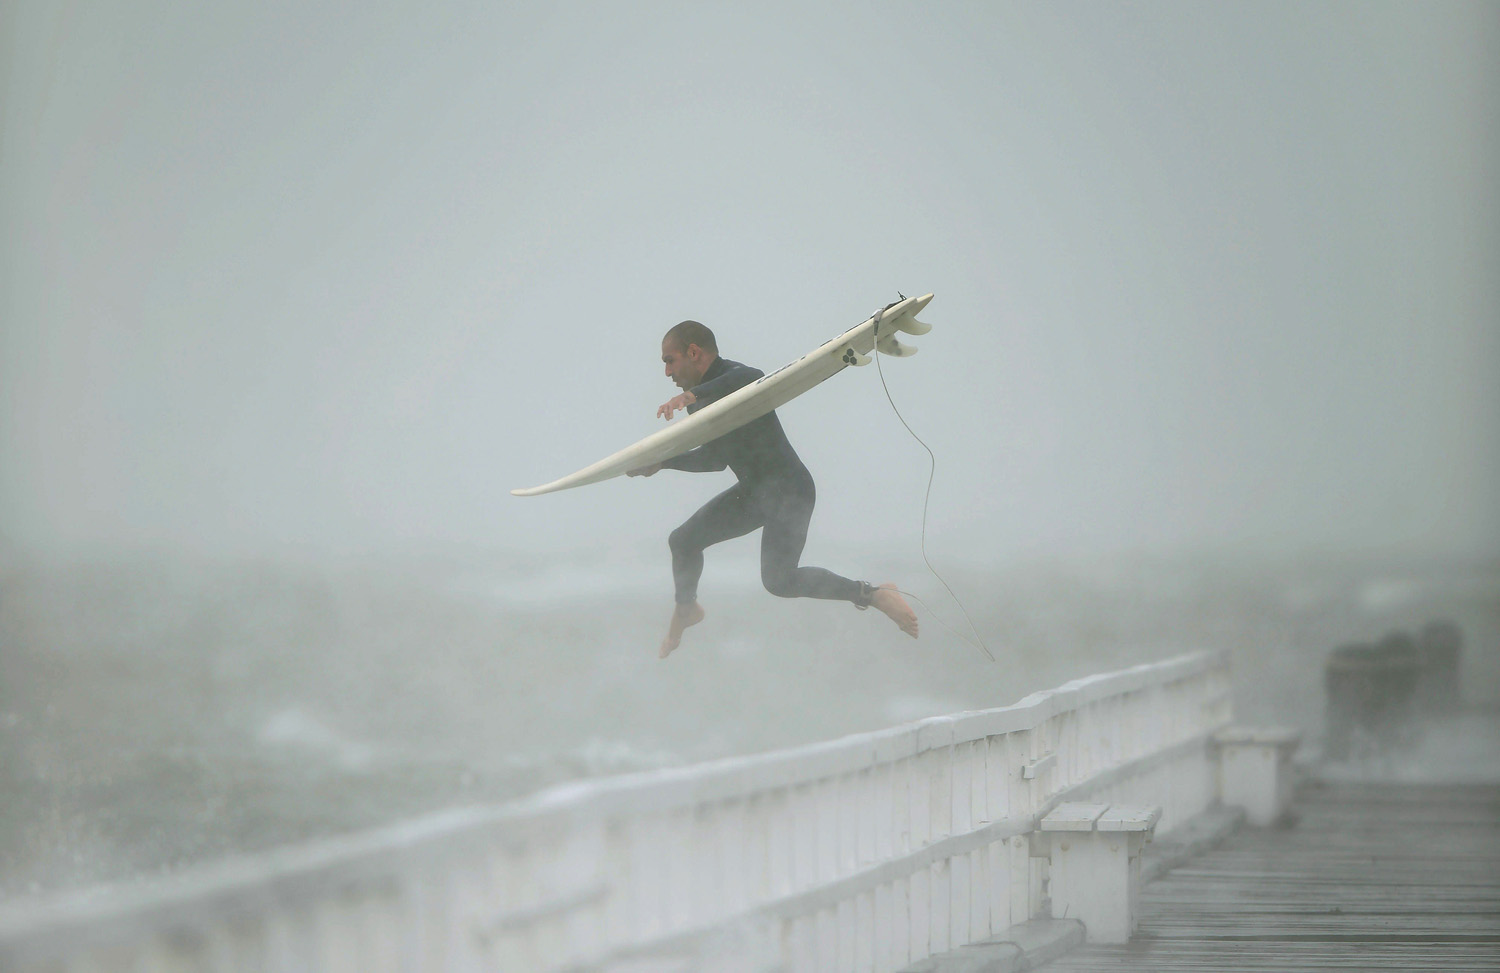 A surfer jumps off the pier into Port Phillip Bay to take advantage of the waves as a storm lashes the Melbourne area on June 24, 2014.